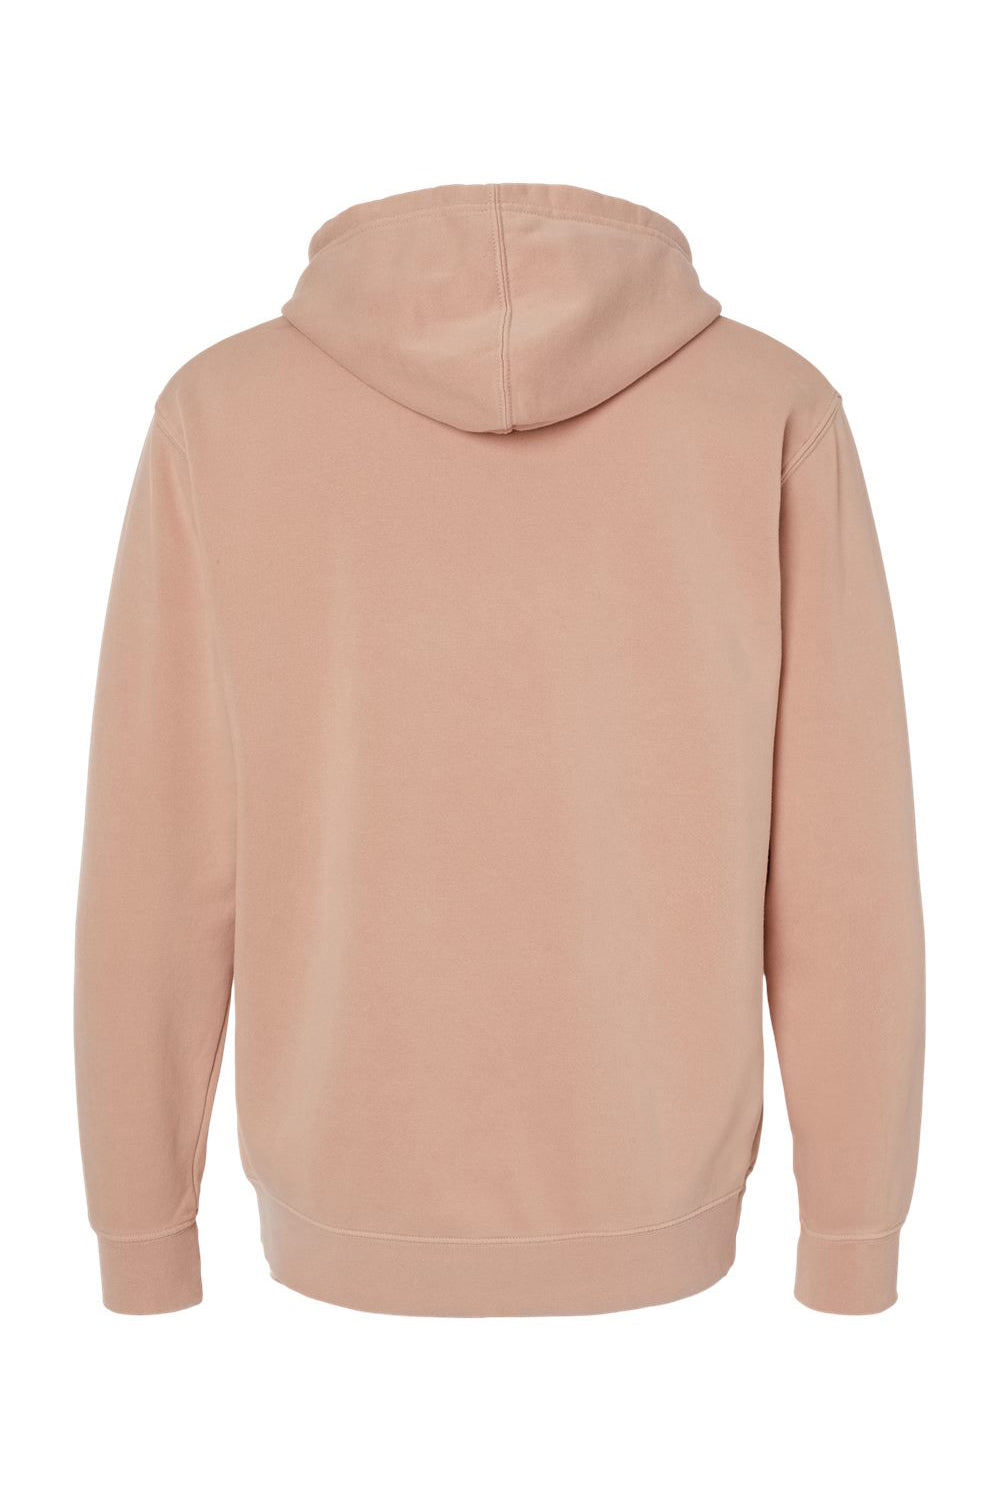 Independent Trading Co. PRM4500 Mens Pigment Dyed Hooded Sweatshirt Hoodie Dusty Pink Flat Back